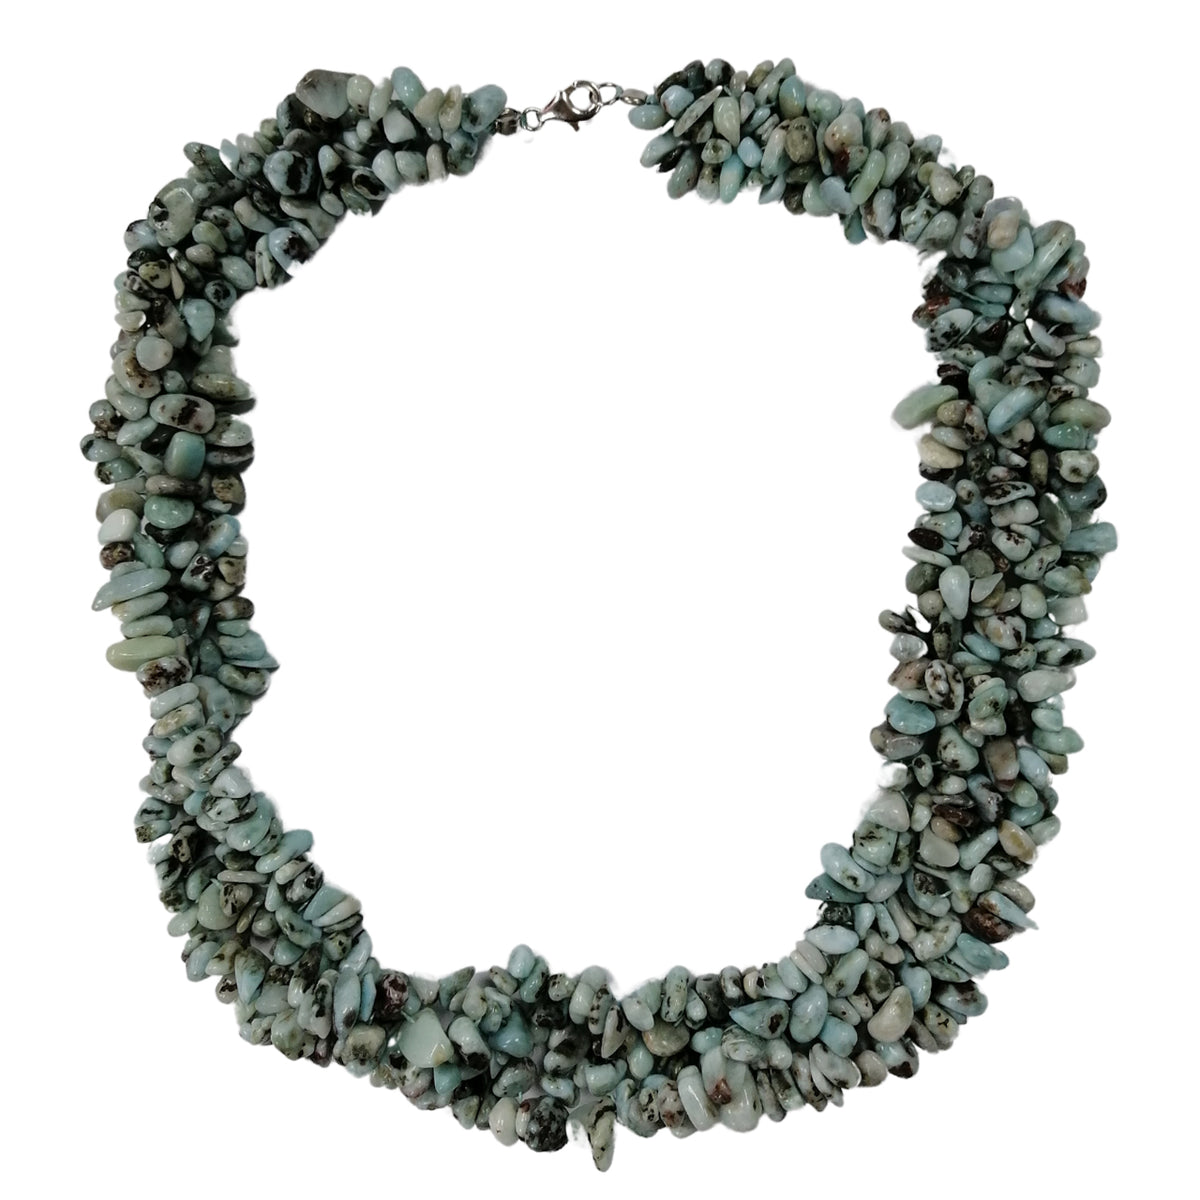 Pearlz Gallery Larimar Chips Knitted Sterling Silver Necklace - Necklaces & Pendants - British D'sire